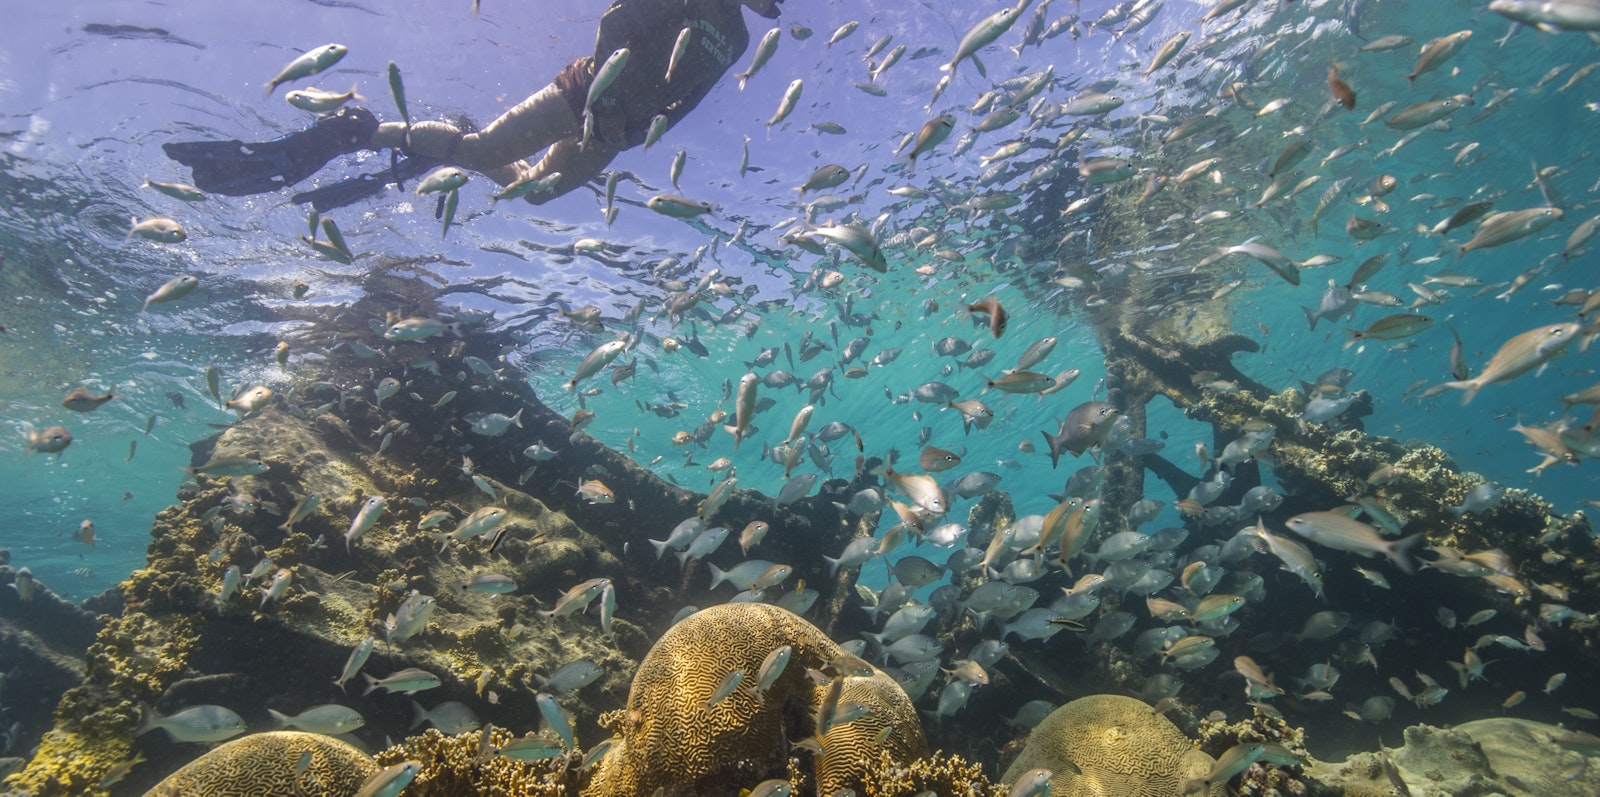 A person snorkels in the ocean, a school of fish and coral underneath